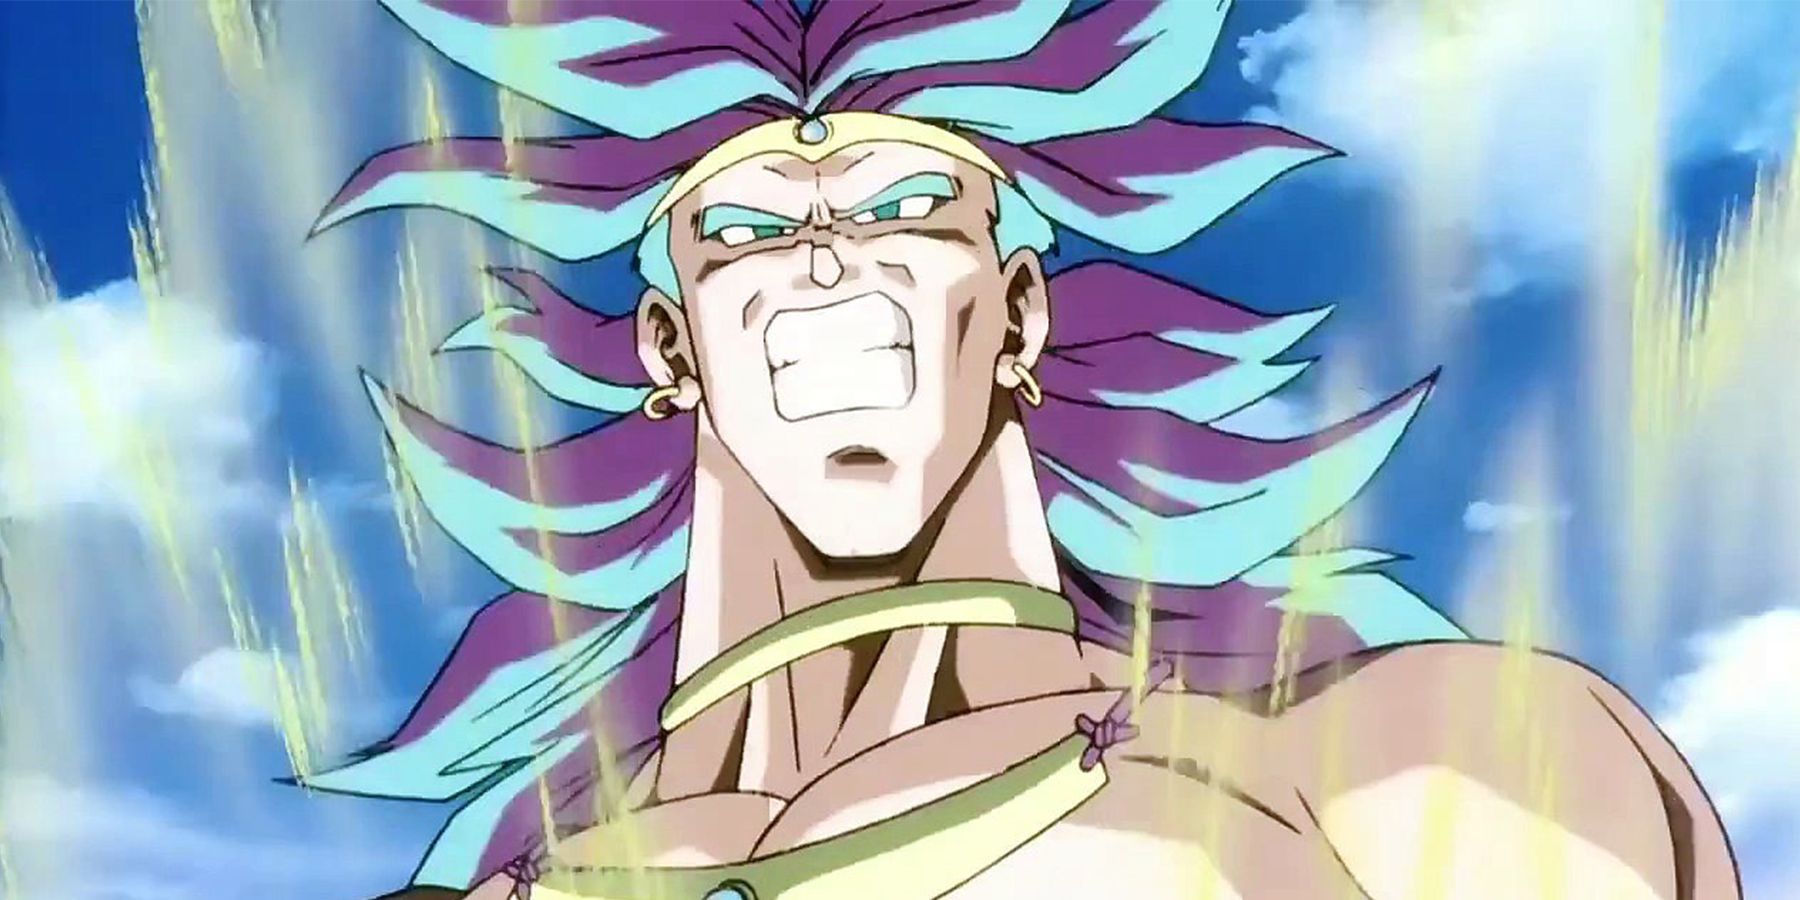 Dragon Ball Super: Broly's Blue Hair Form - Abilities and Powers - wide 3